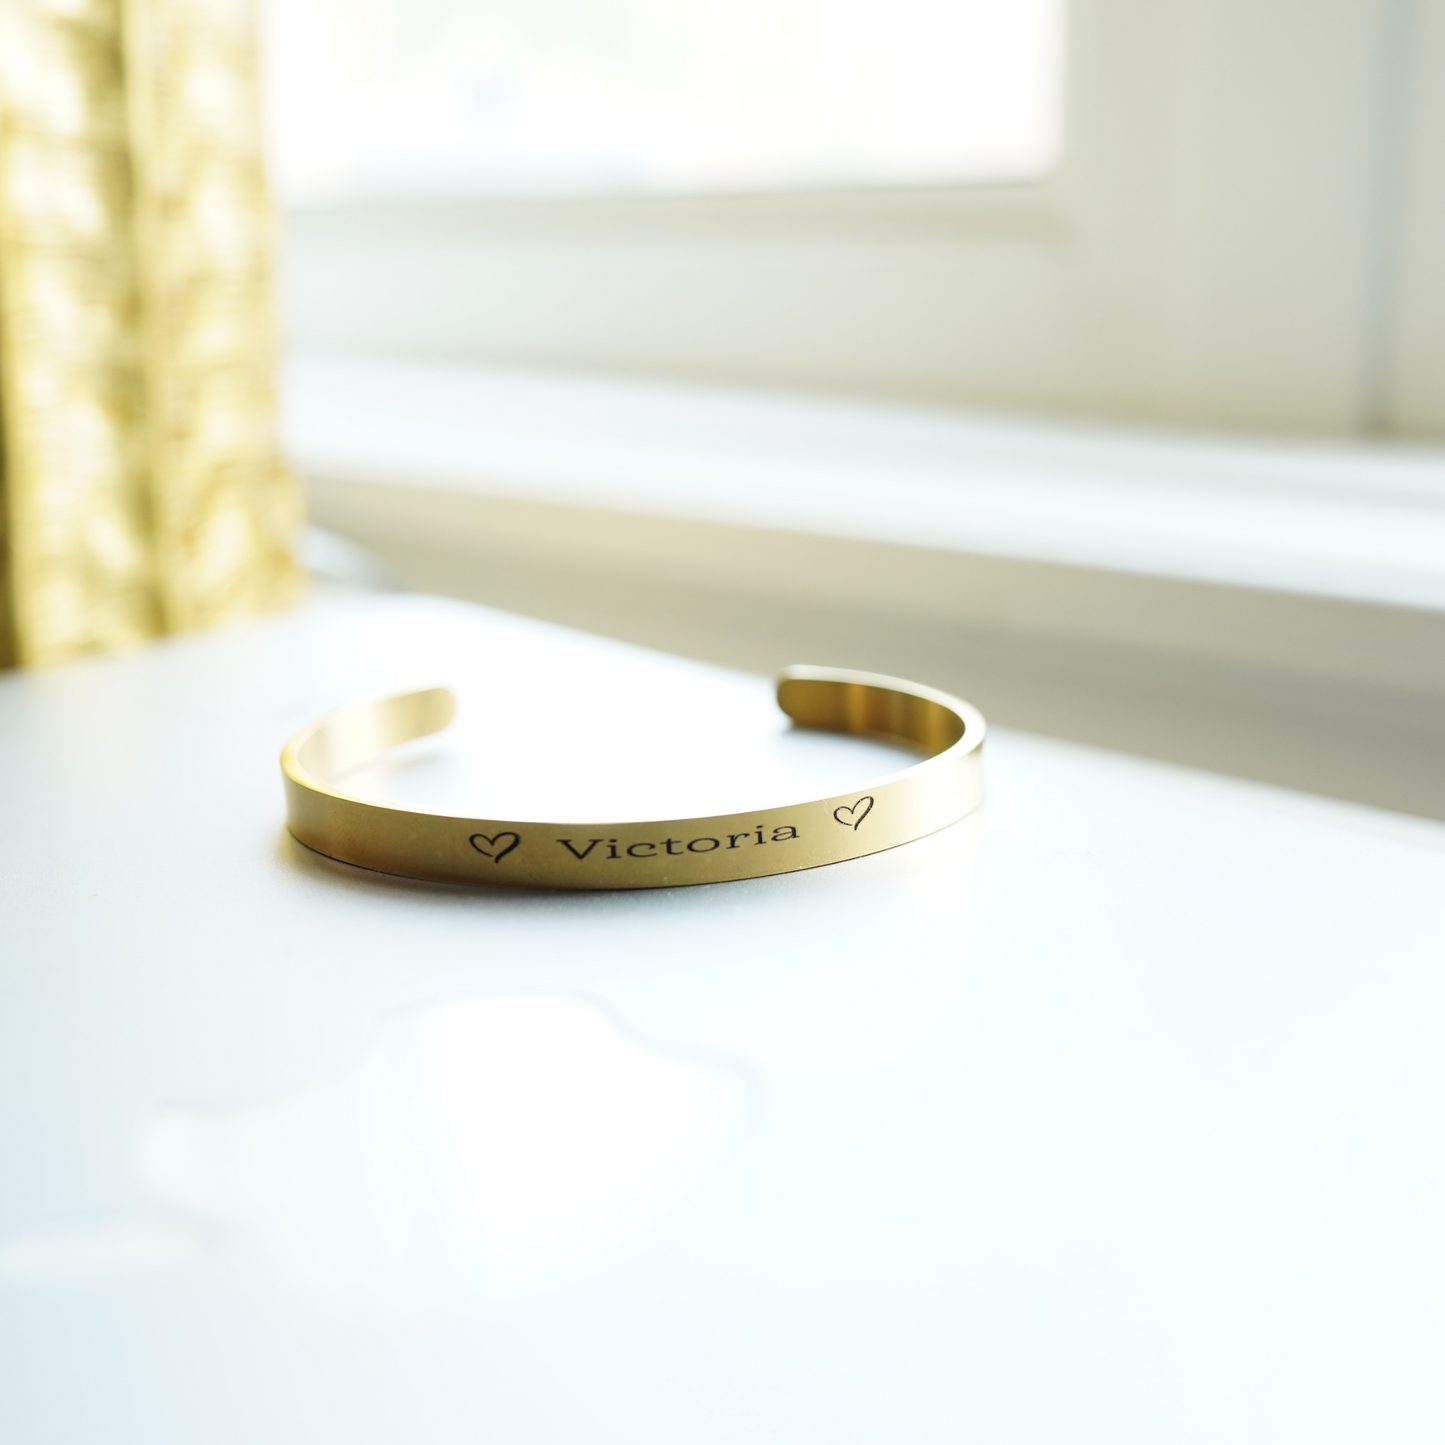 Gold Or Silver Cuff Name Bracelet for Women, Engraved Initials or Name, 18K Gold Plated Cuff Bracelet